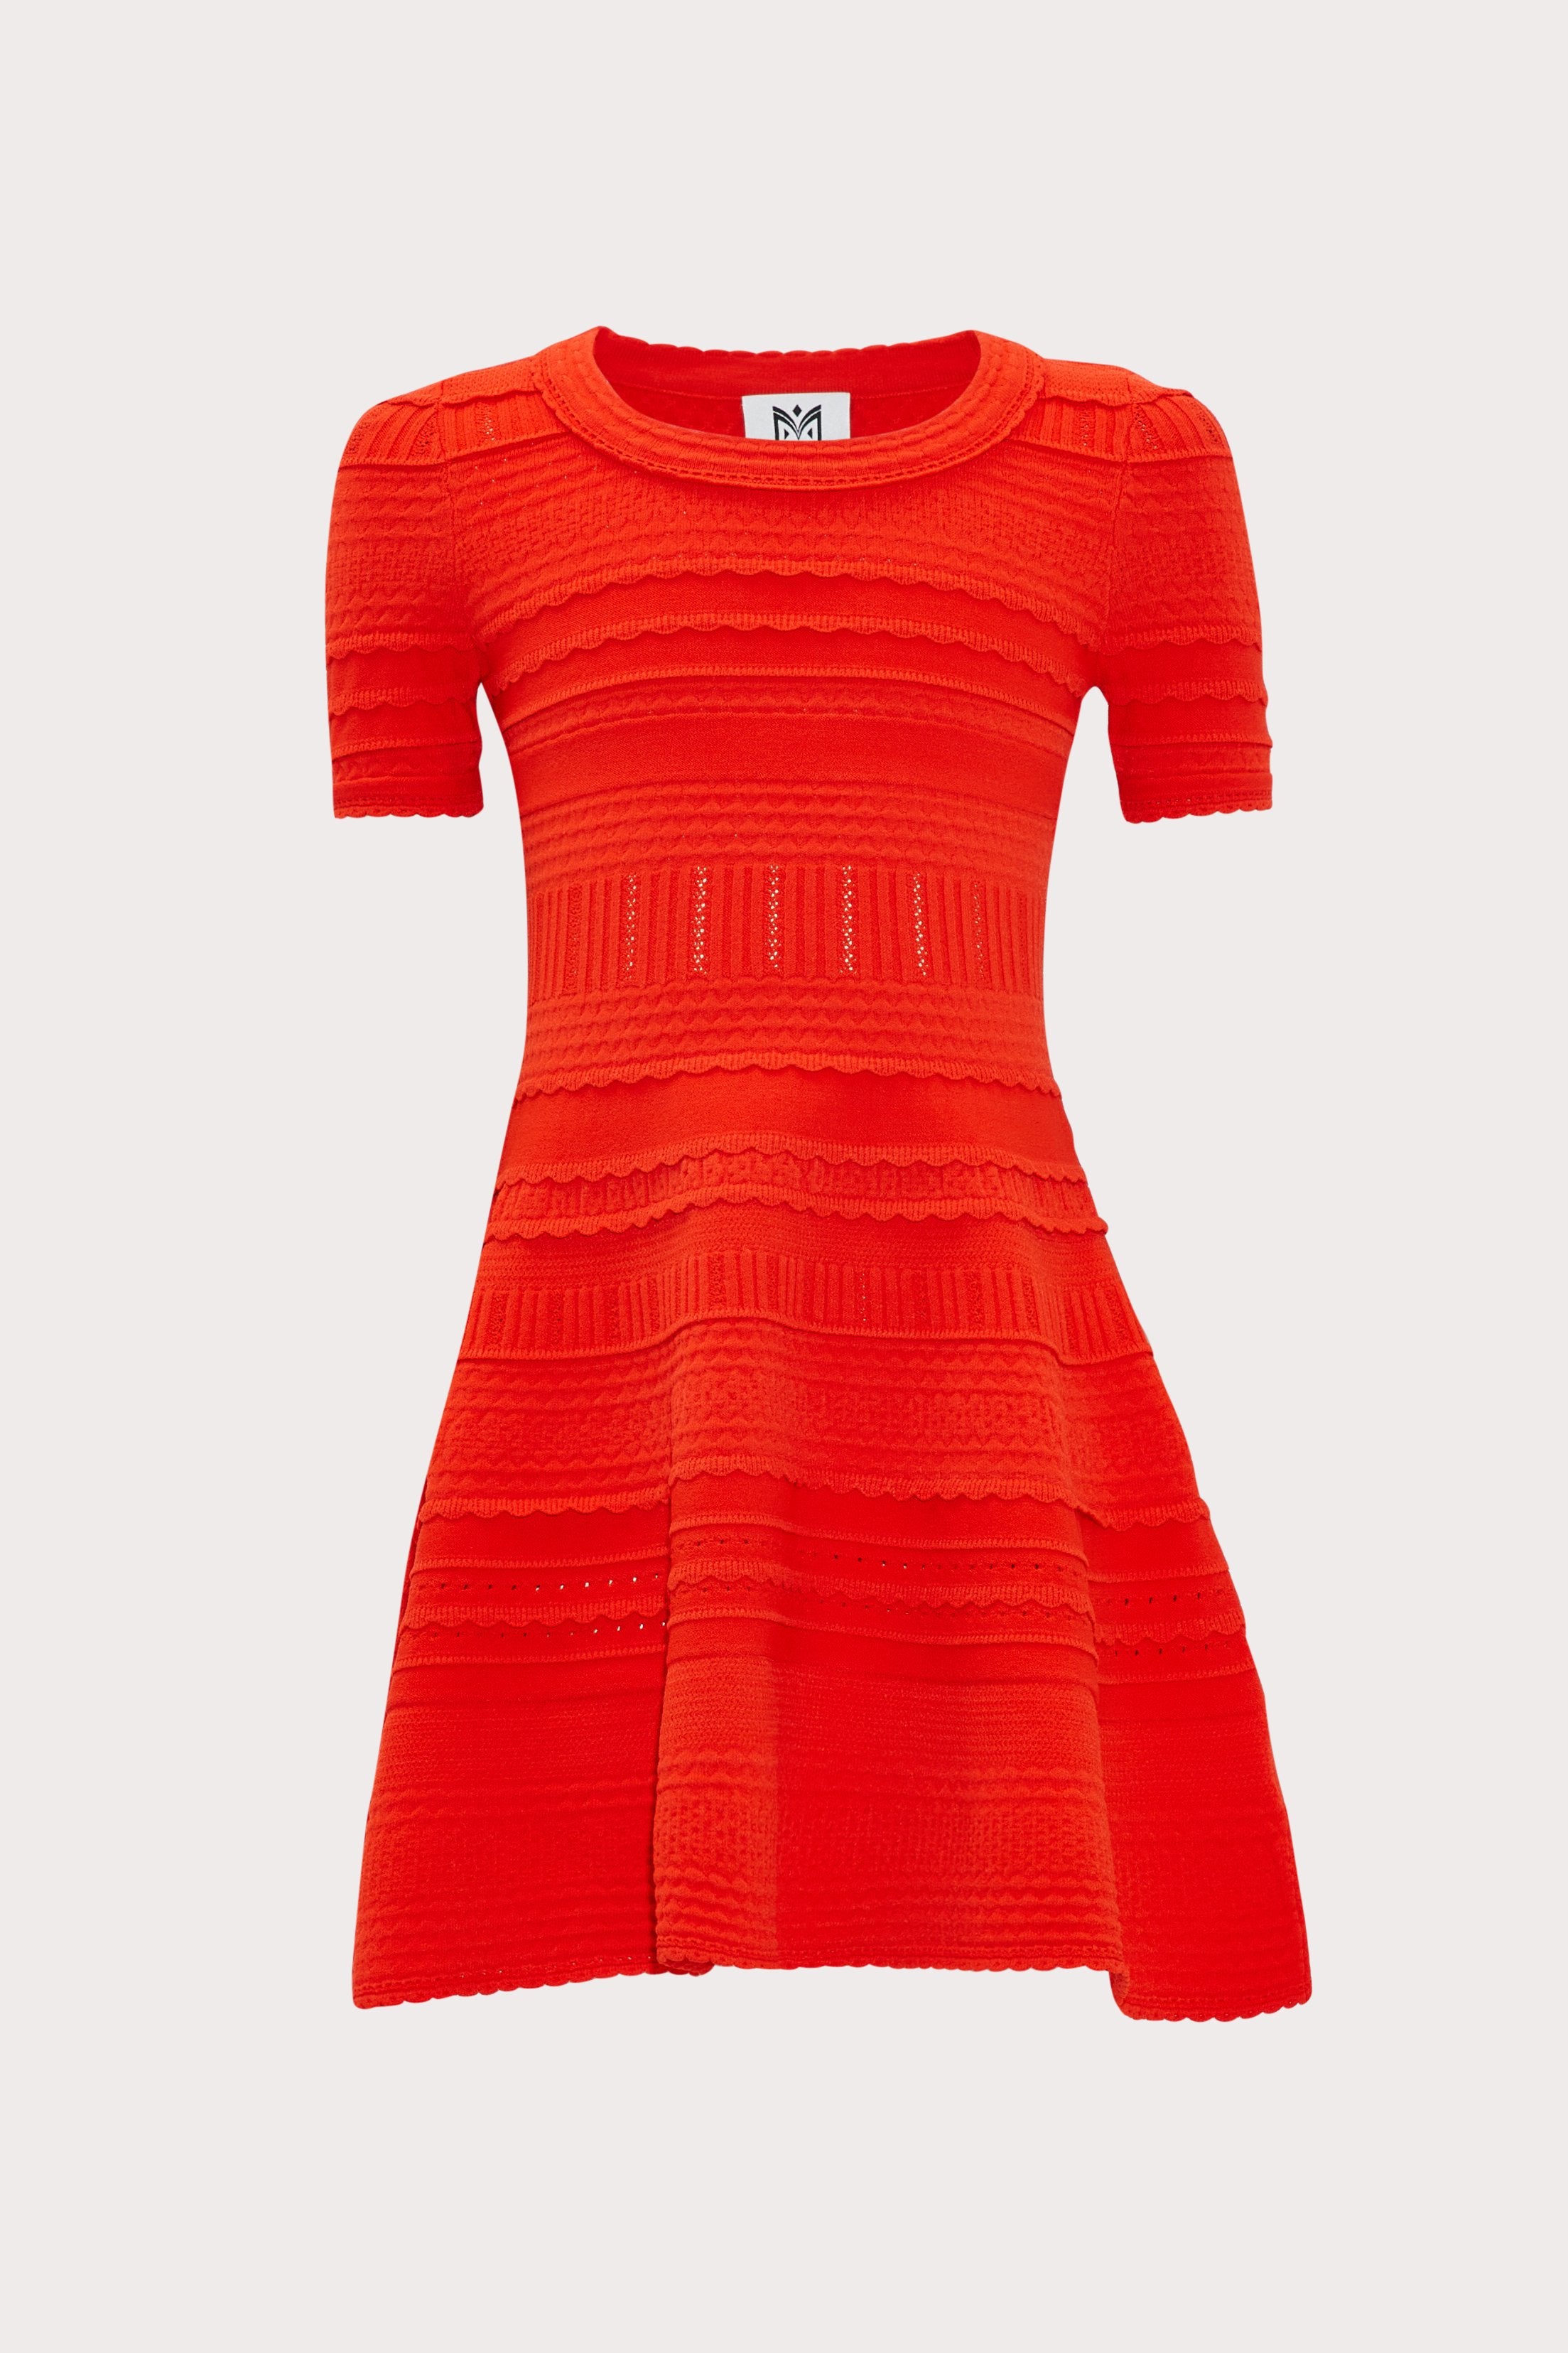 Milly Minis Textured Tech Dress In Tomato